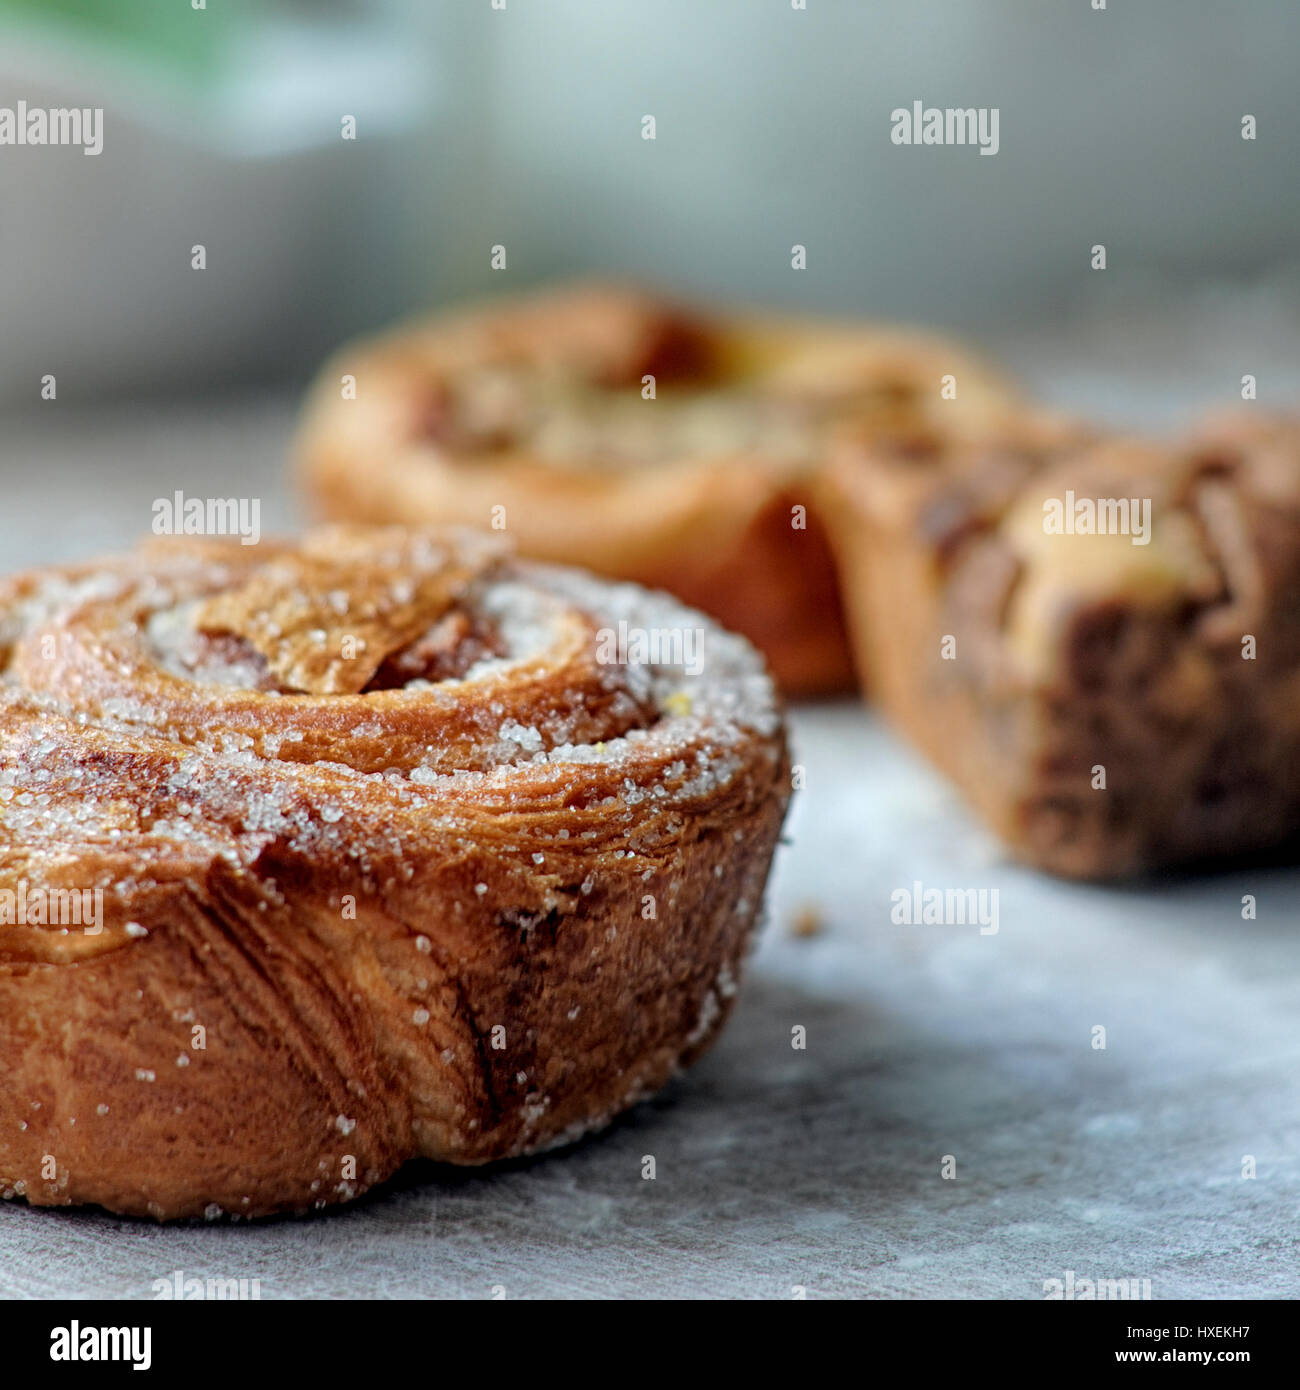 Baked goods in natural light Stock Photo